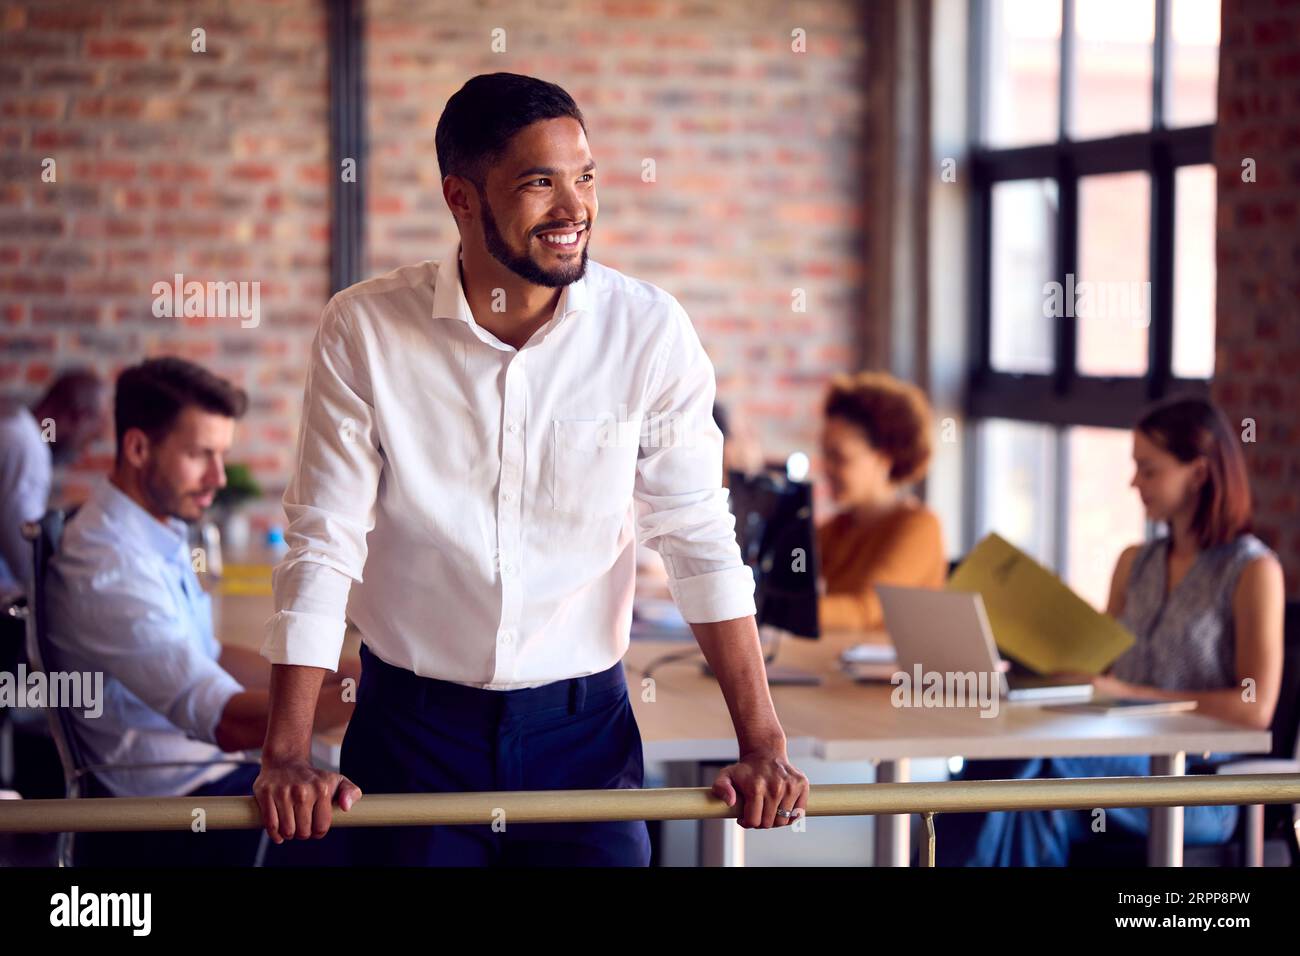 Portrait Of Smiling Businessman Standing In Busy Office Stock Photo